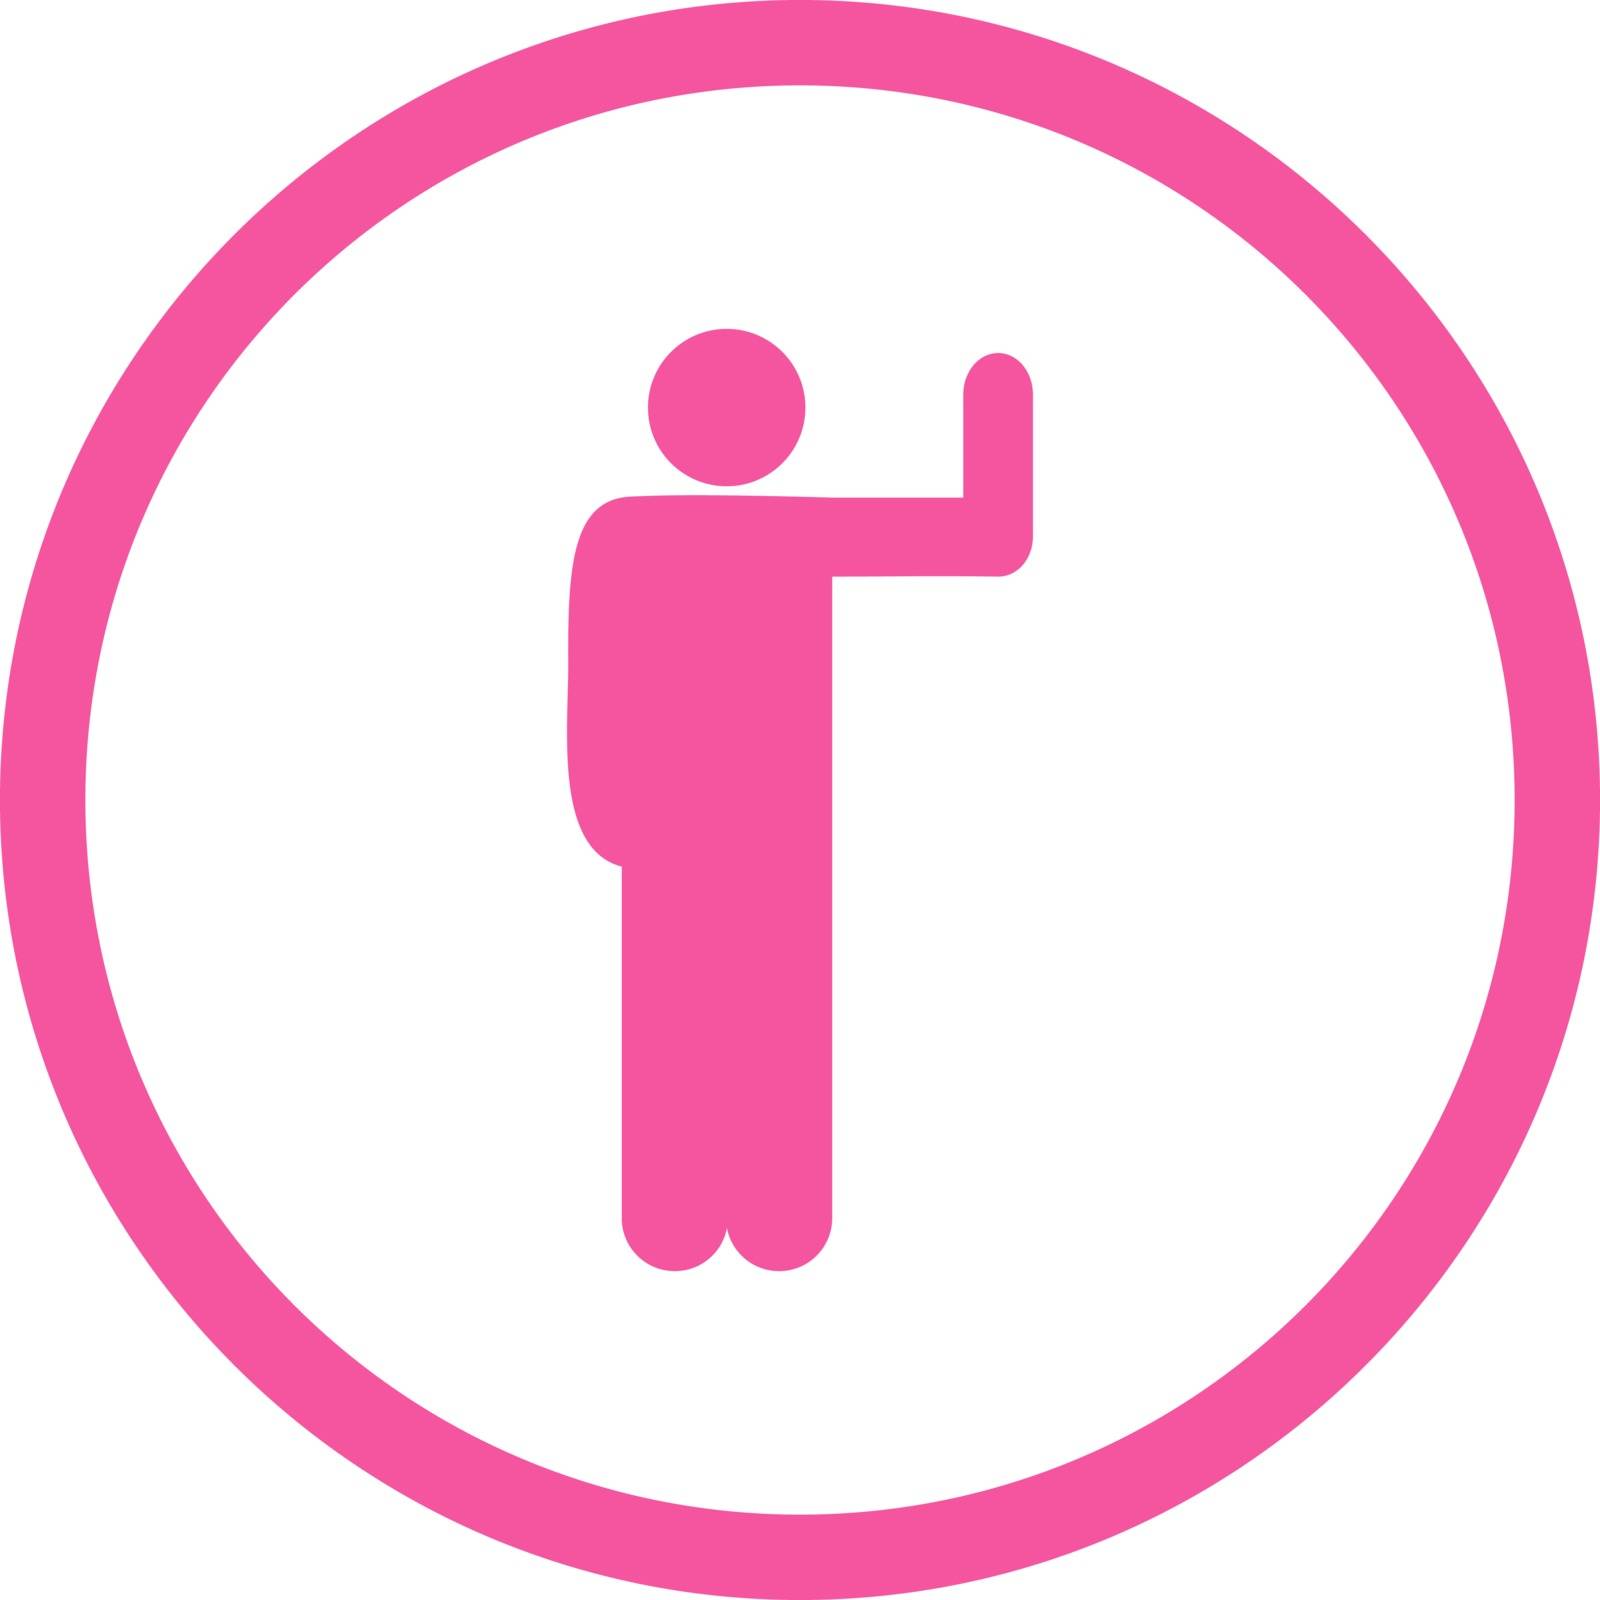 Vote vector icon. This rounded flat symbol is drawn with pink color on a white background.